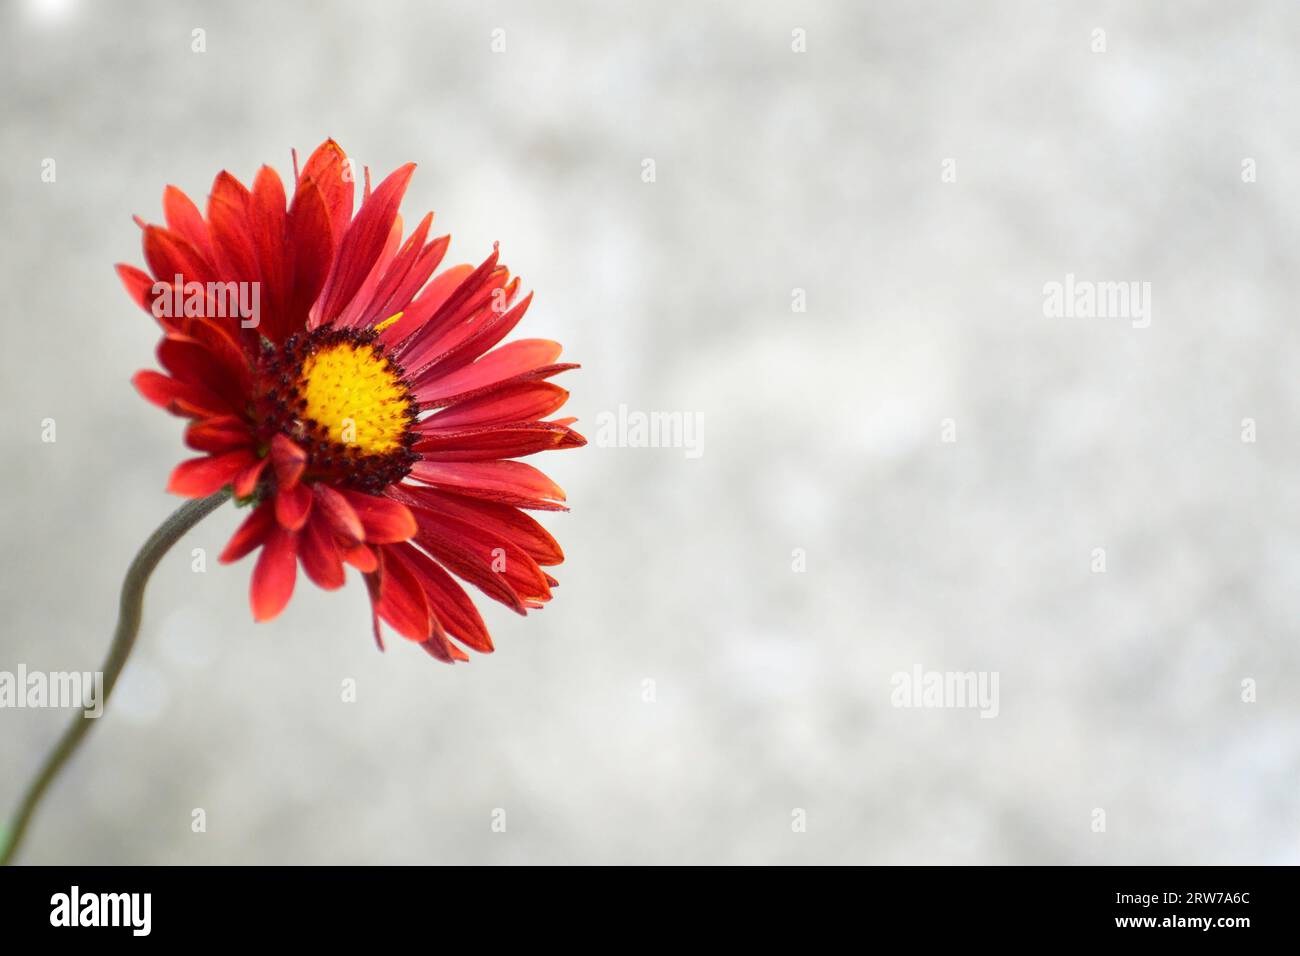 Mothers Day flower background or card with copy space. Gaillardia Burgundy or Blanket flower close up. Stock Photo